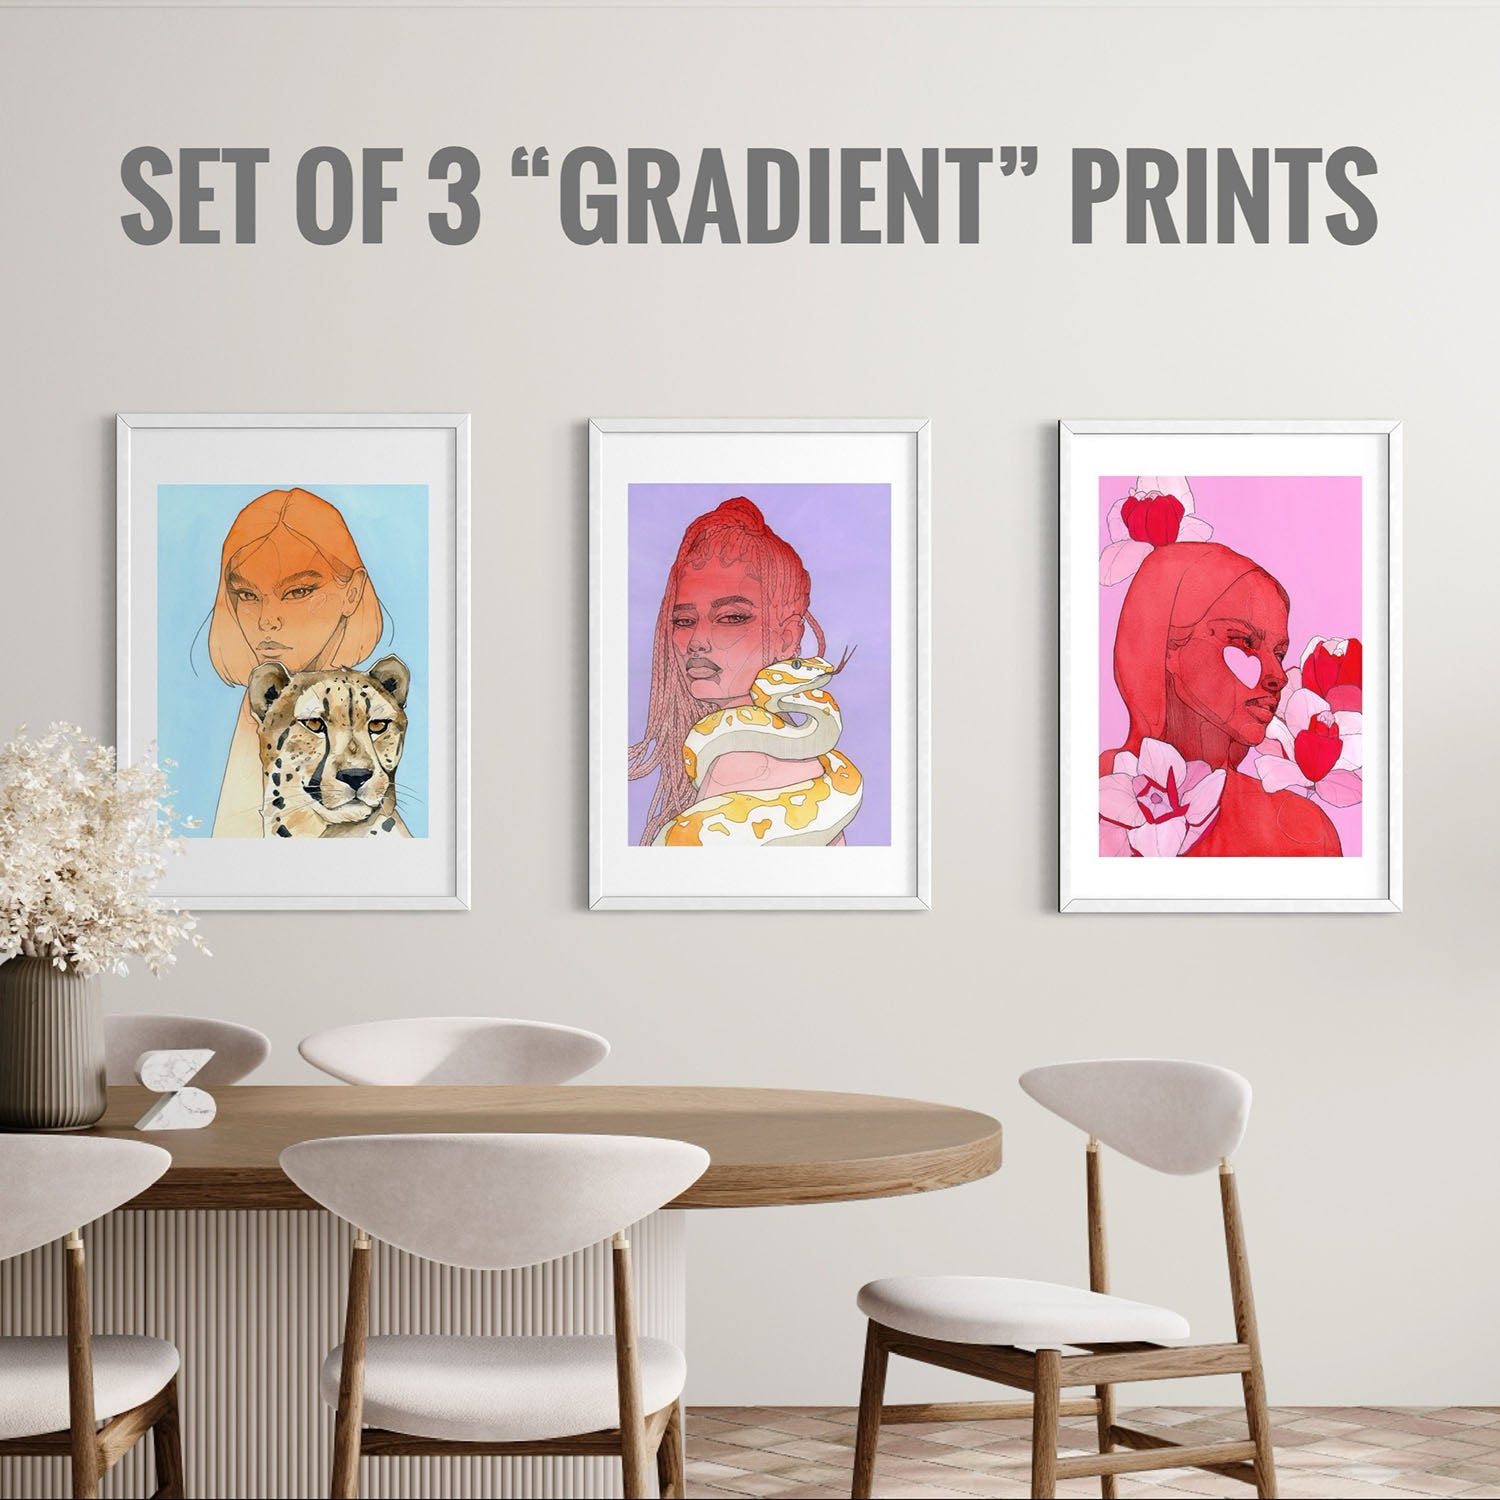 Set of 3 gradient prints by Polina Bright